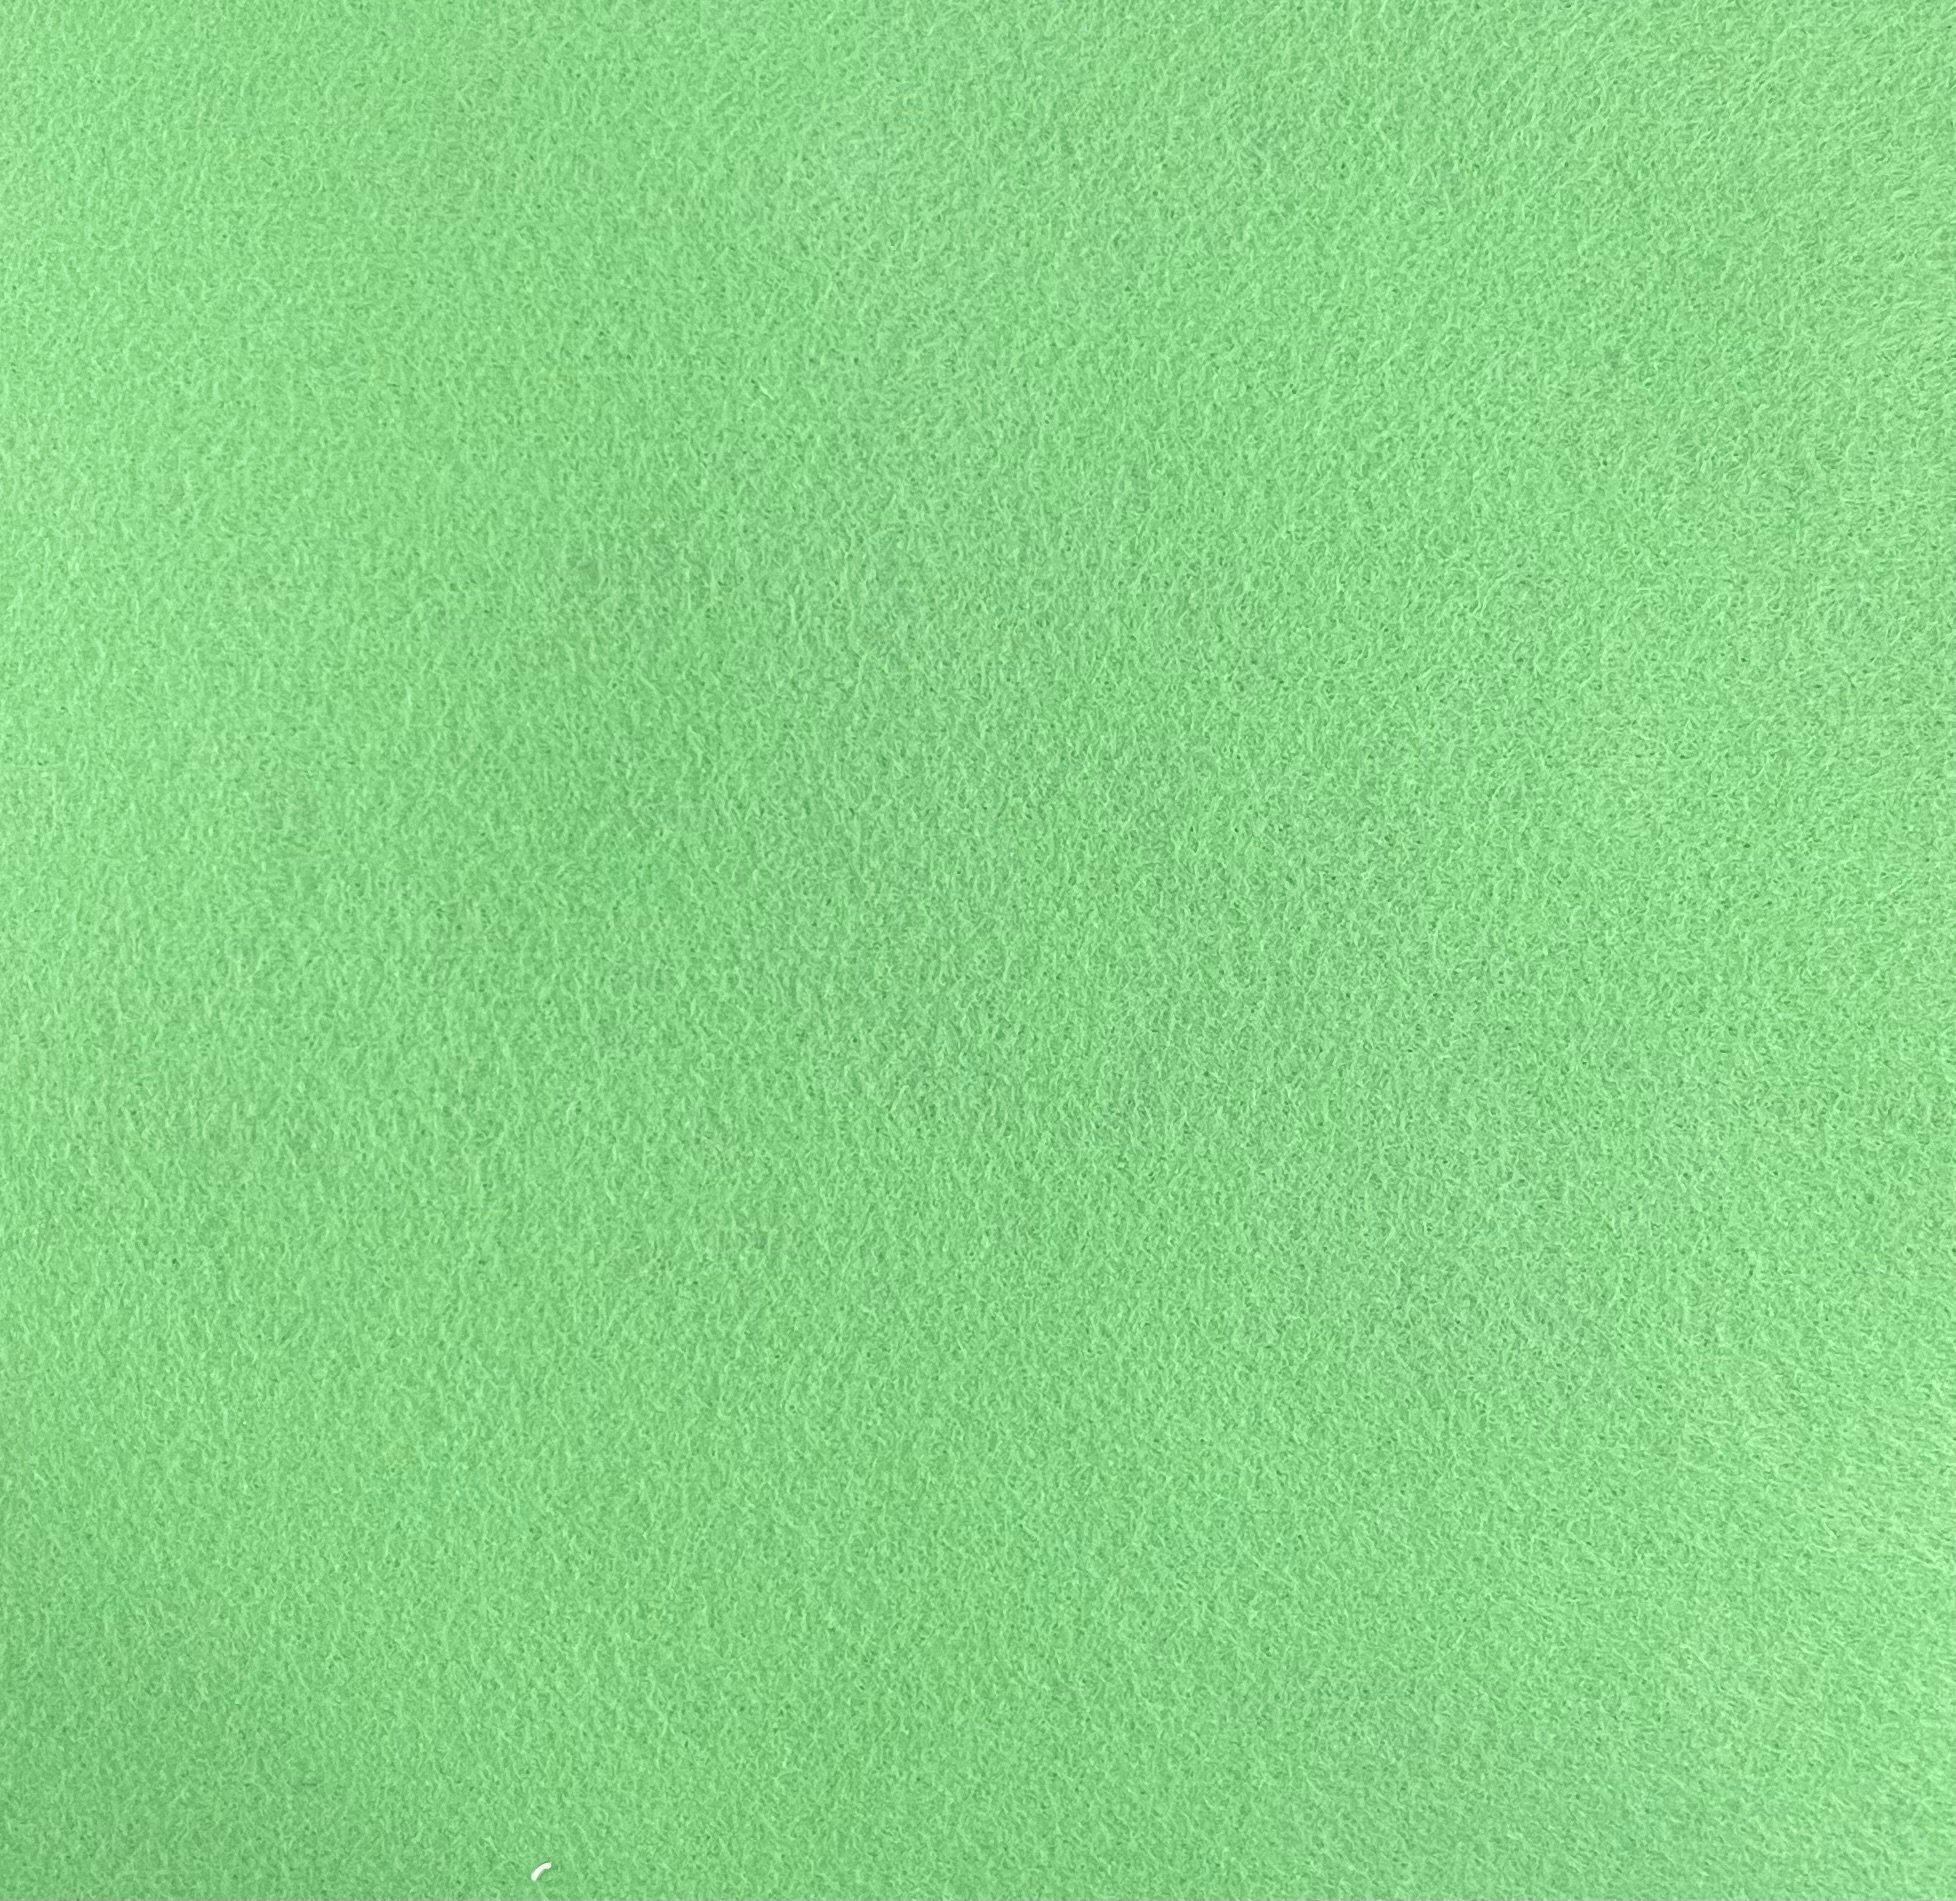 FabricLA Acrylic Felt Fabric - 72 Inch Wide 1.6mm Thick Felt by The Yard -  Use Soft Felt Sheets for Sewing, Cushion, and Padding, DIY Arts & Crafts  (Half Yards, Turquoise)